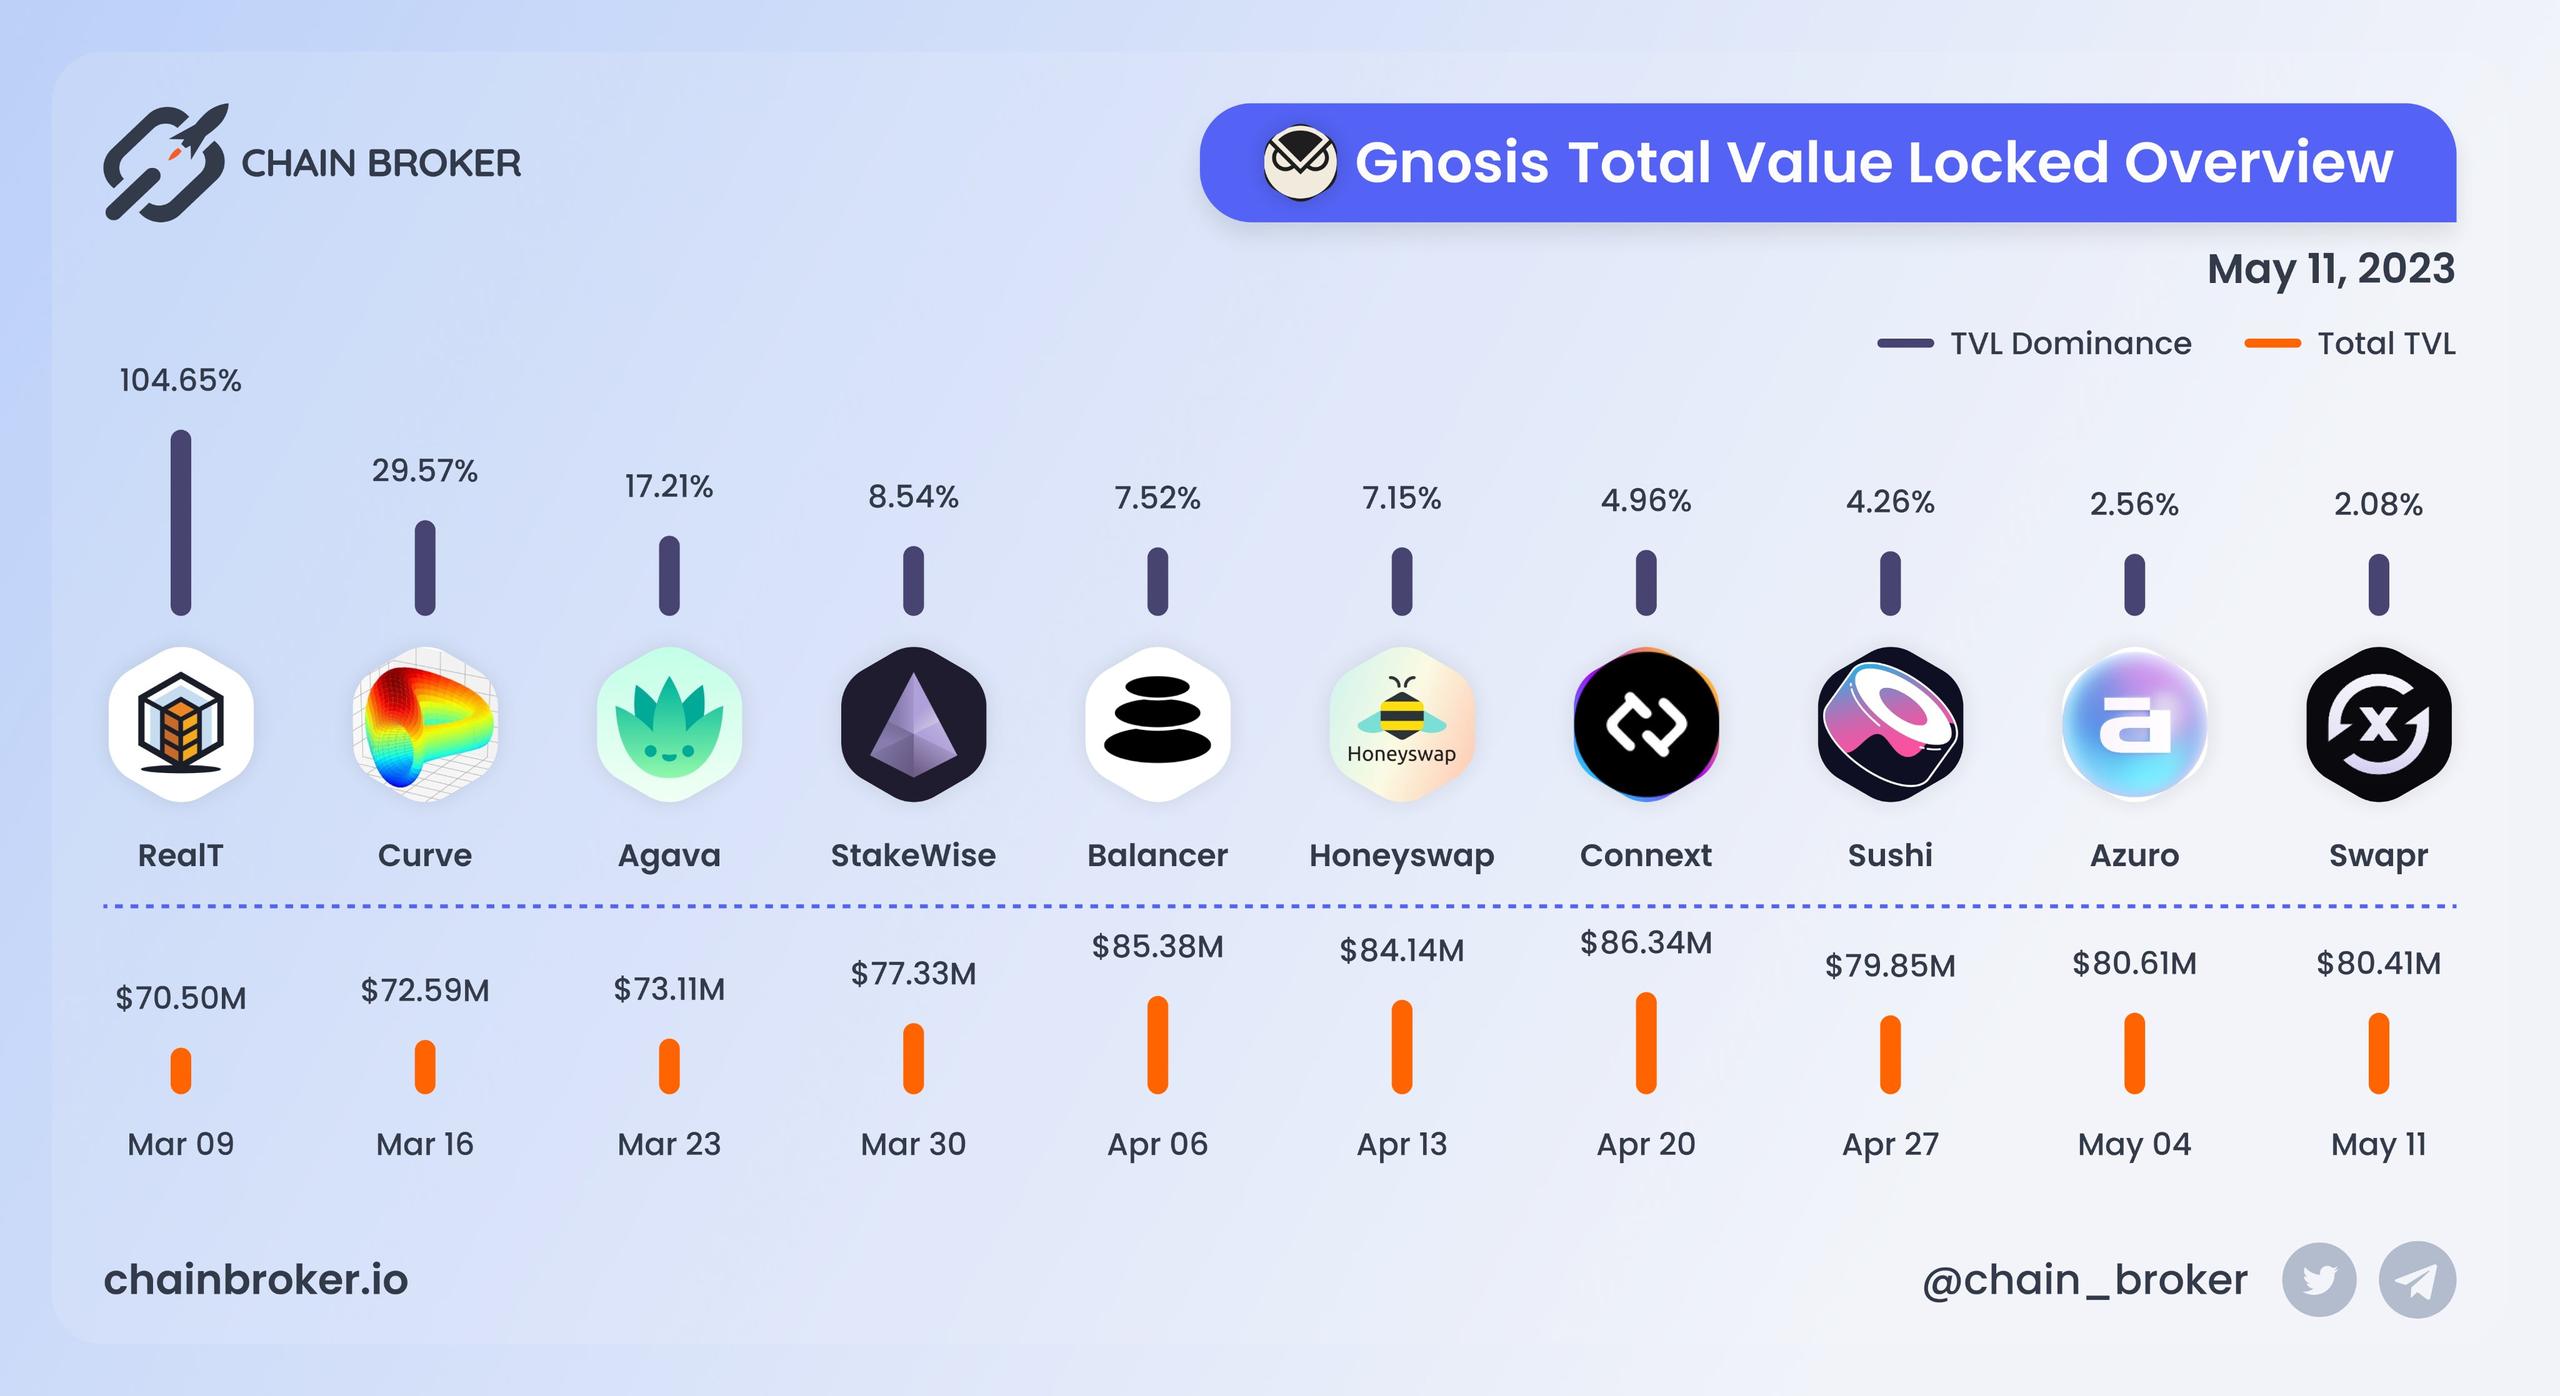 Gnosis total value locked overview